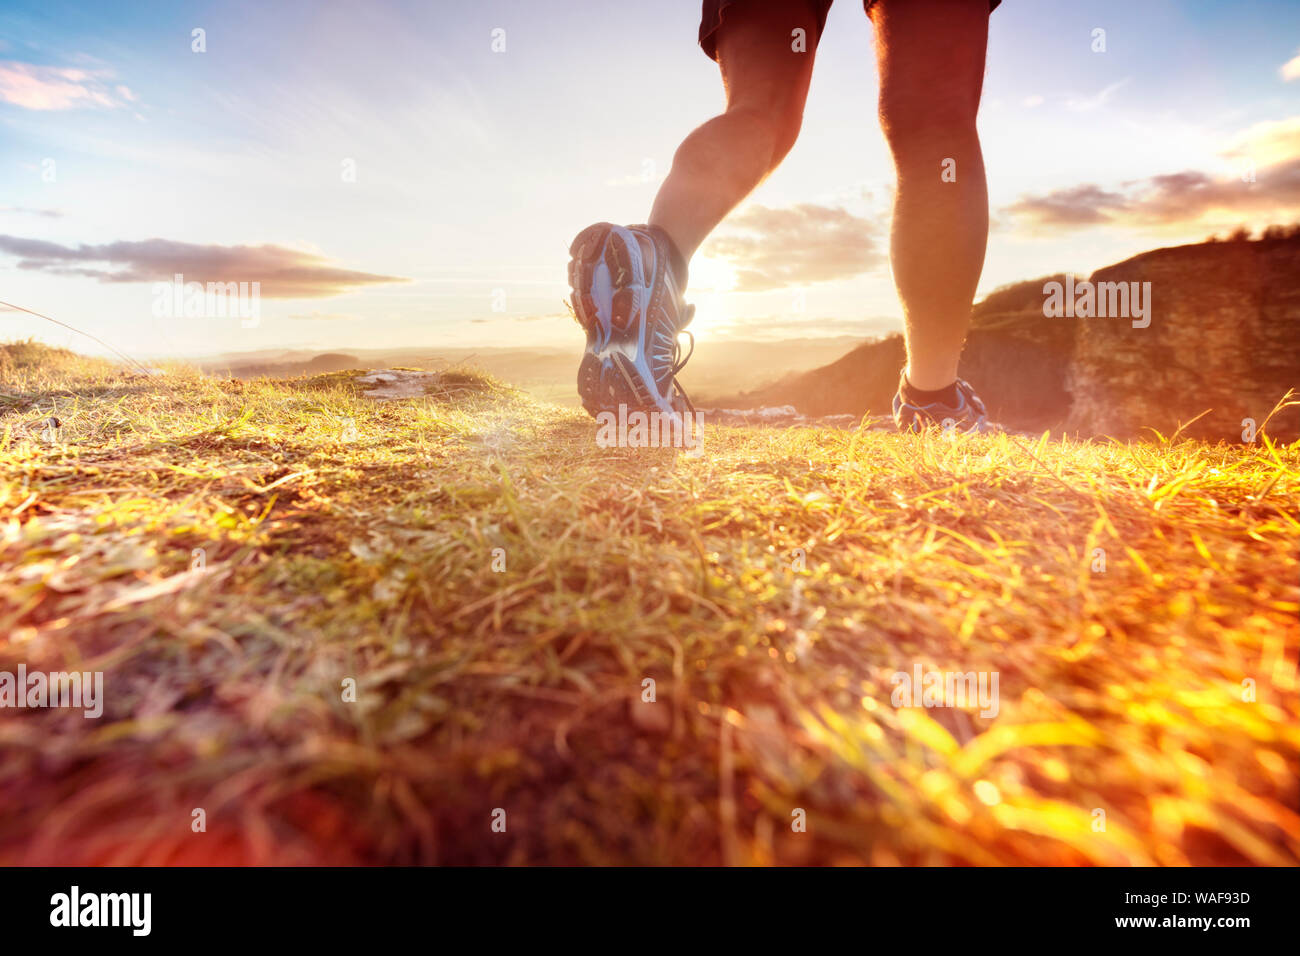 Outdoor cross-country running in morning sunrise concept for exercising, fitness and healthy lifestyle Stock Photo